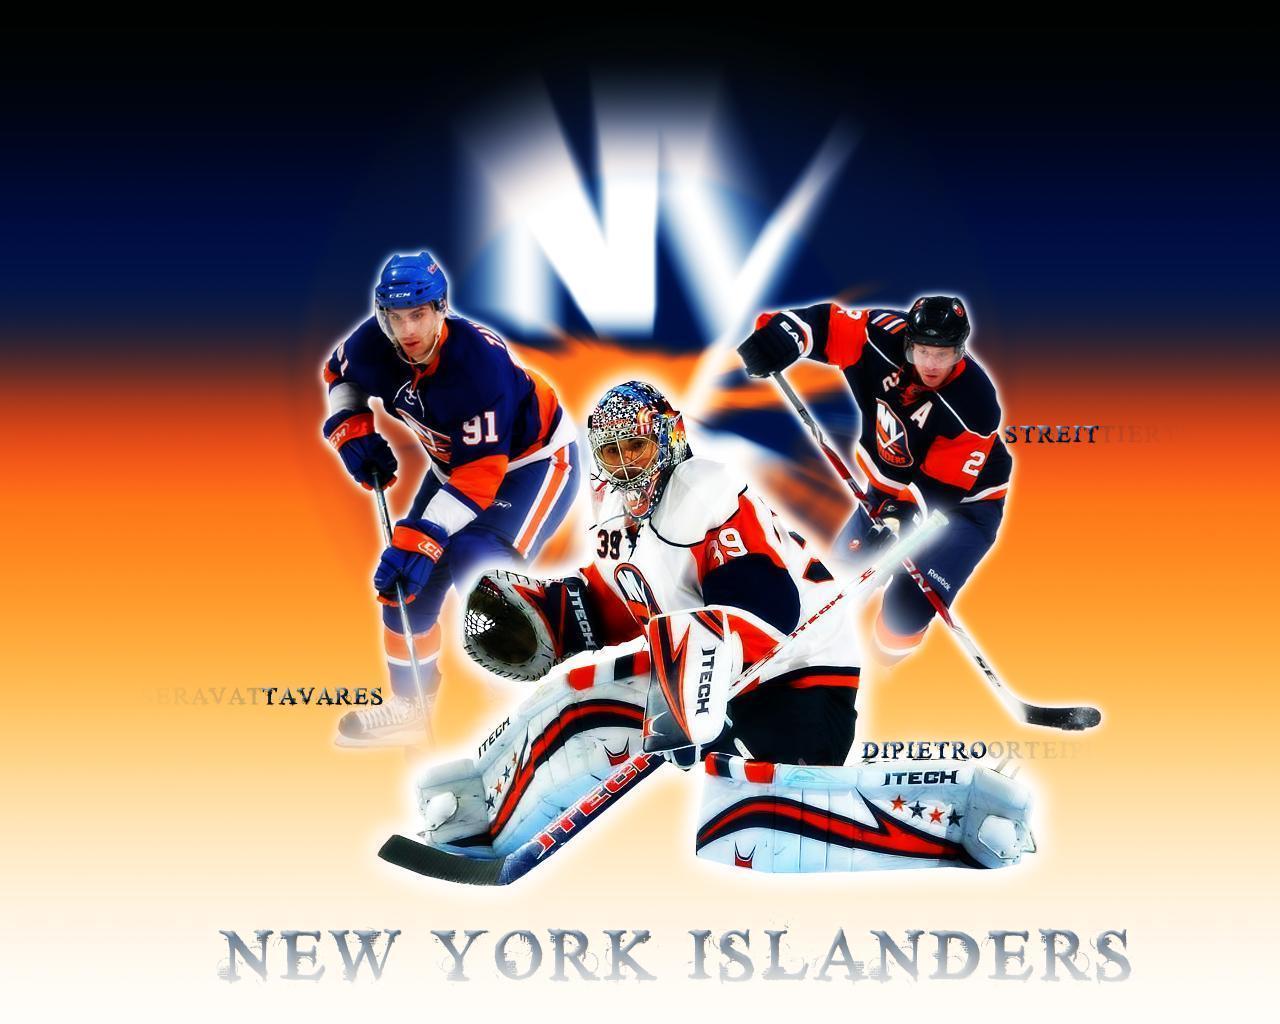 Free download New York Islanders Wallpapers [1280x1024] for your